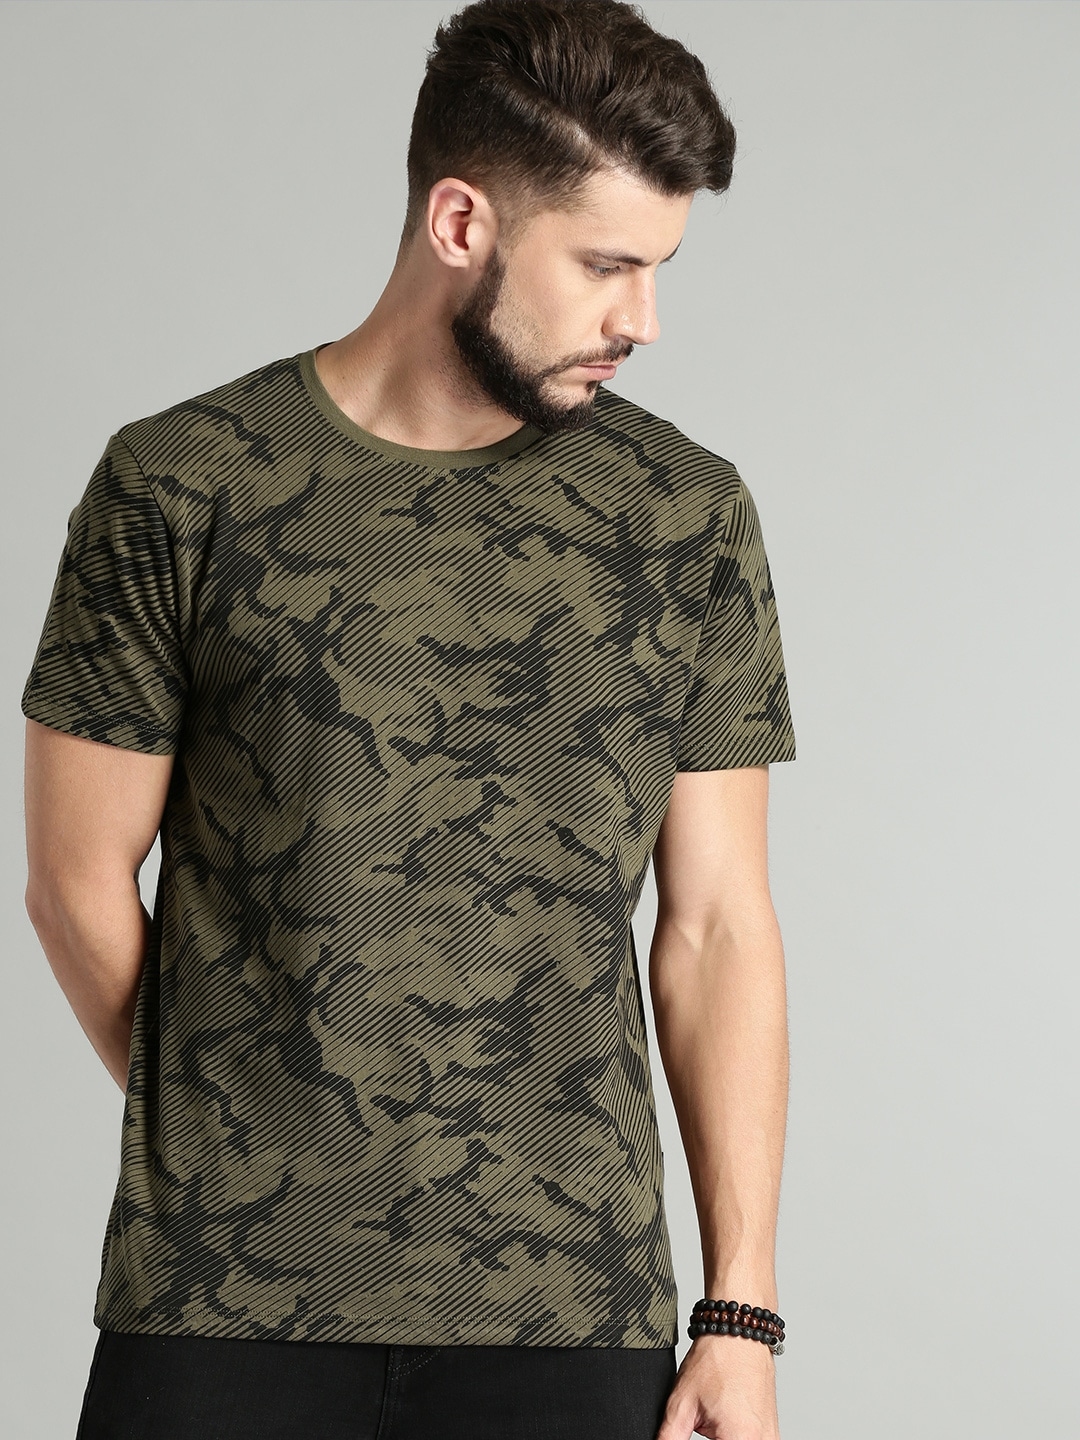 Black Crew-neck T-shirt with Olive Camouflage Shirt Jacket Casual